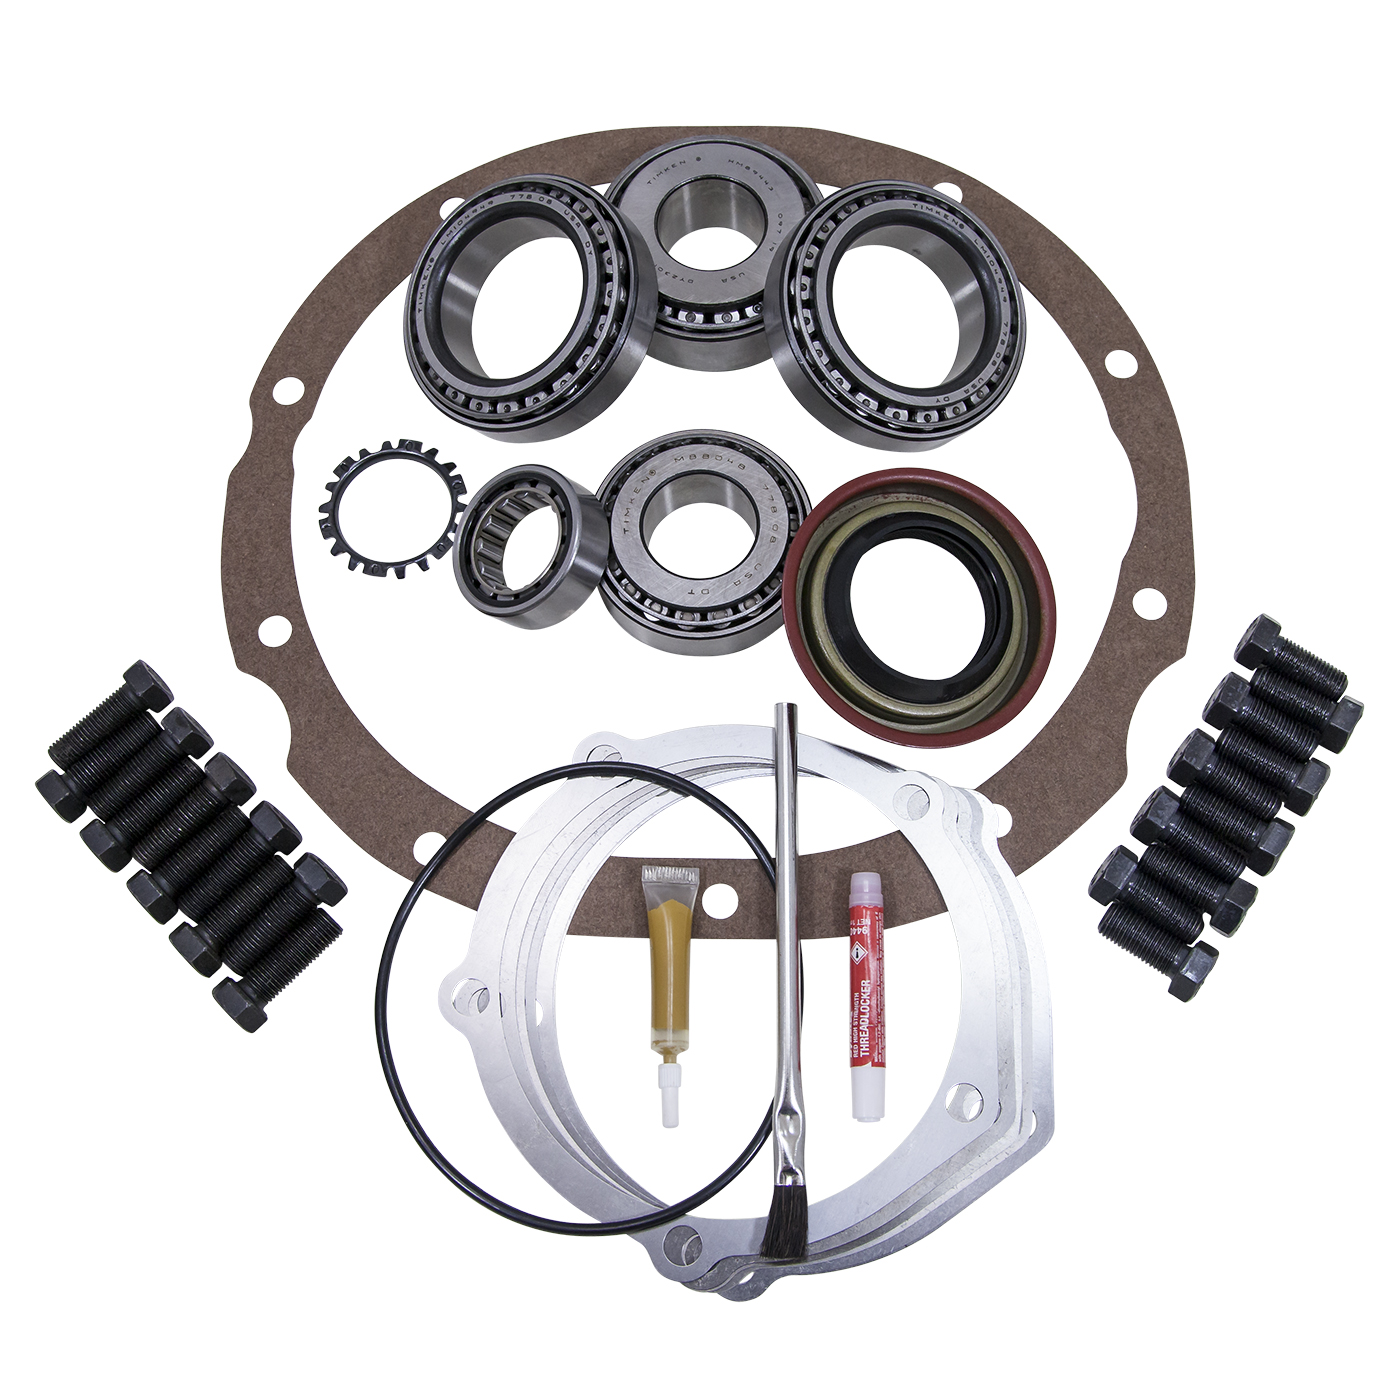 USA Standard Master Overhaul kit, Ford 9" LM102910 differential, w/ solid spacer